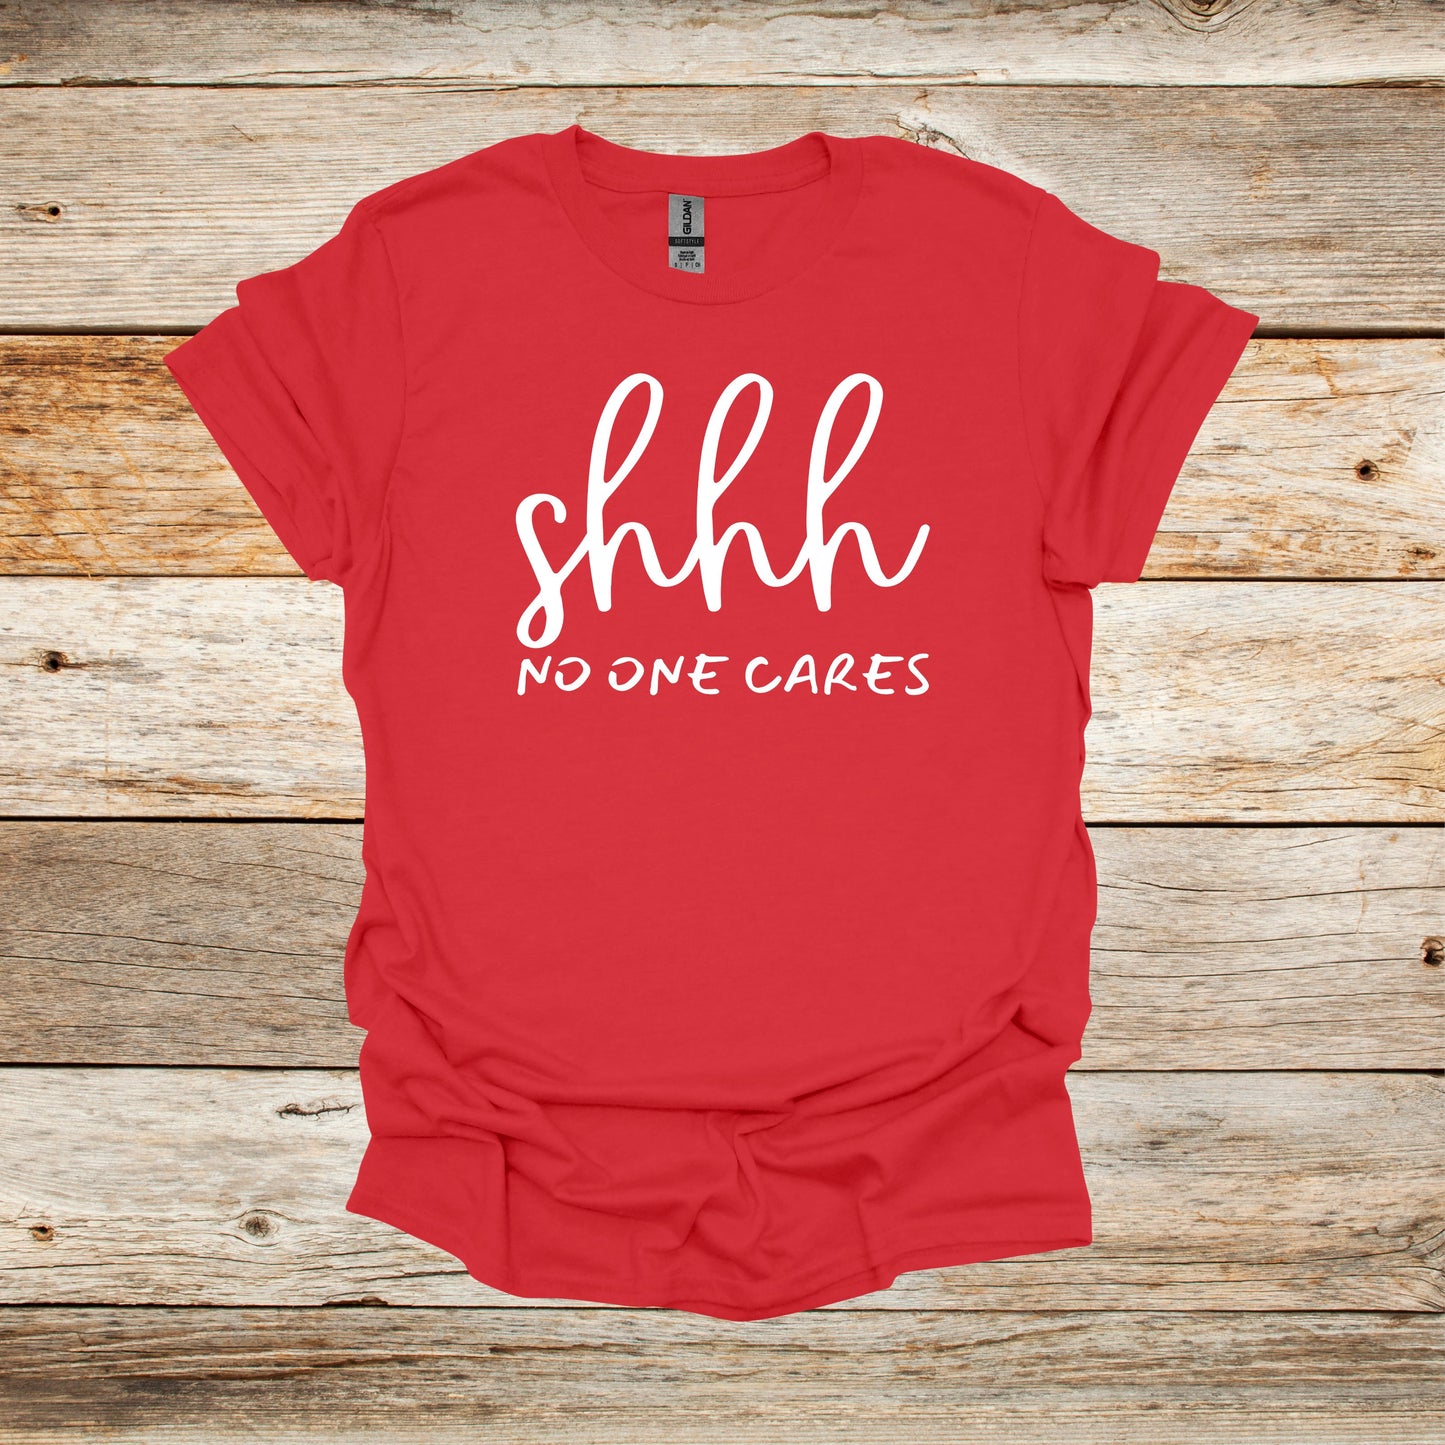 Sayings T-Shirt -Shhh No One Cares - Men's and Women's Tee Shirts - Sayings T-Shirts Graphic Avenue Red Adult Small 